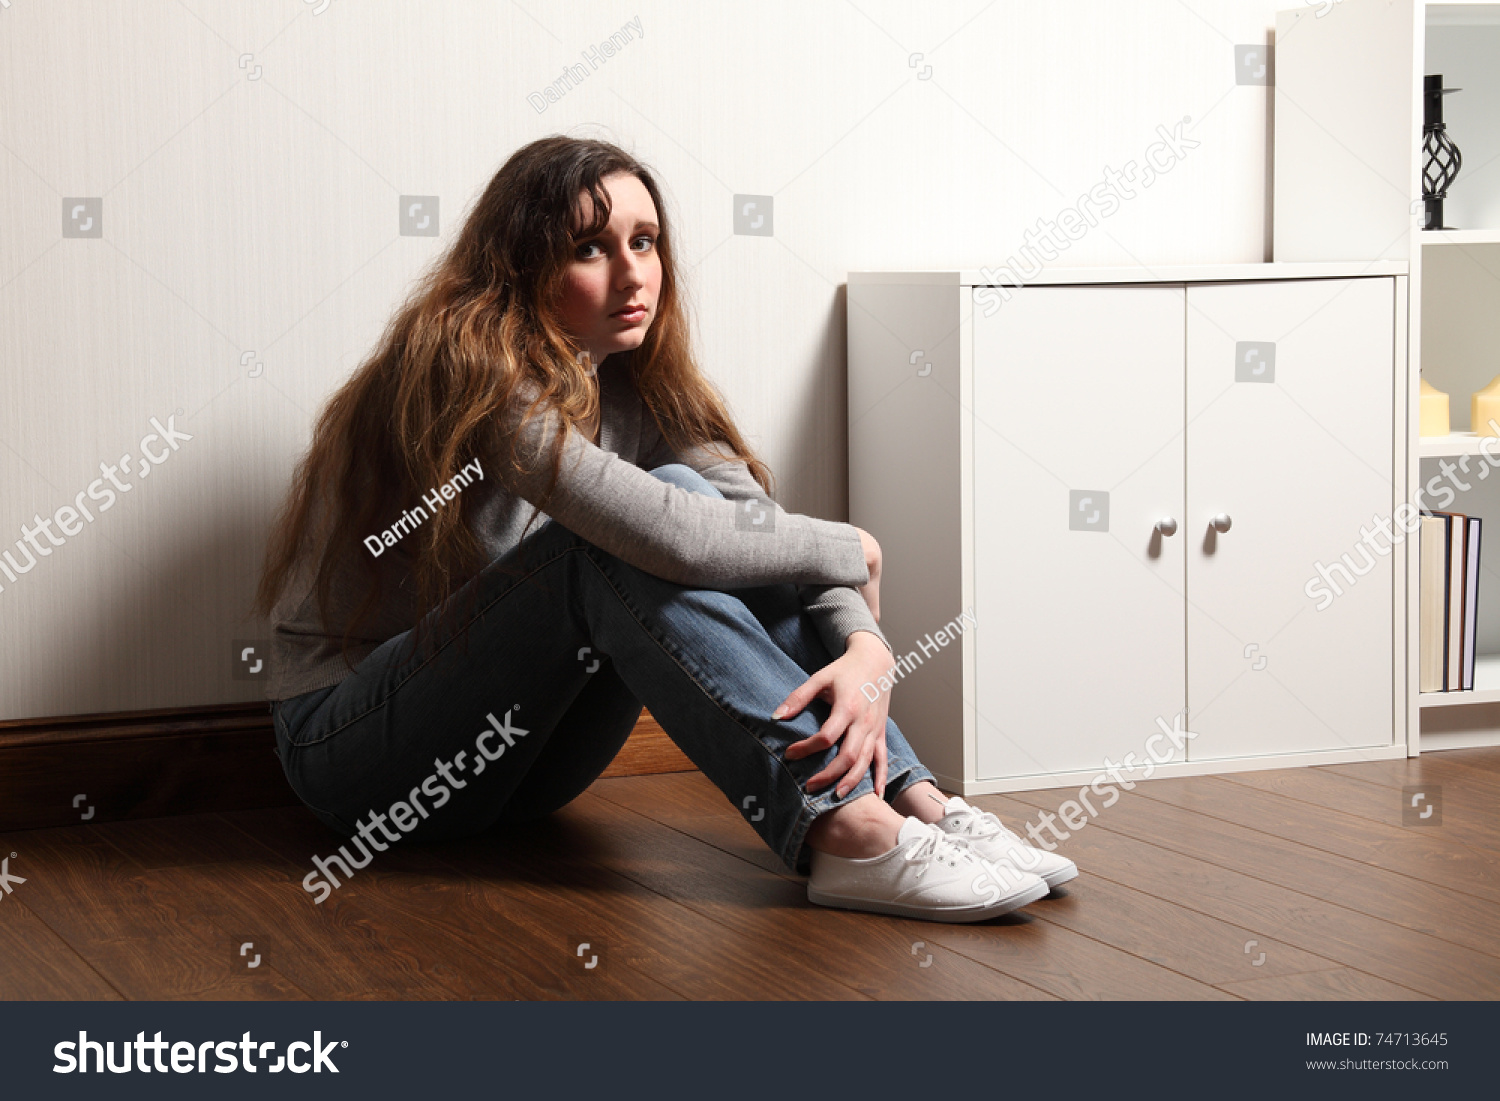 A Nervous And Frightened Looking Teenage Girl Sitting Alone On The ...